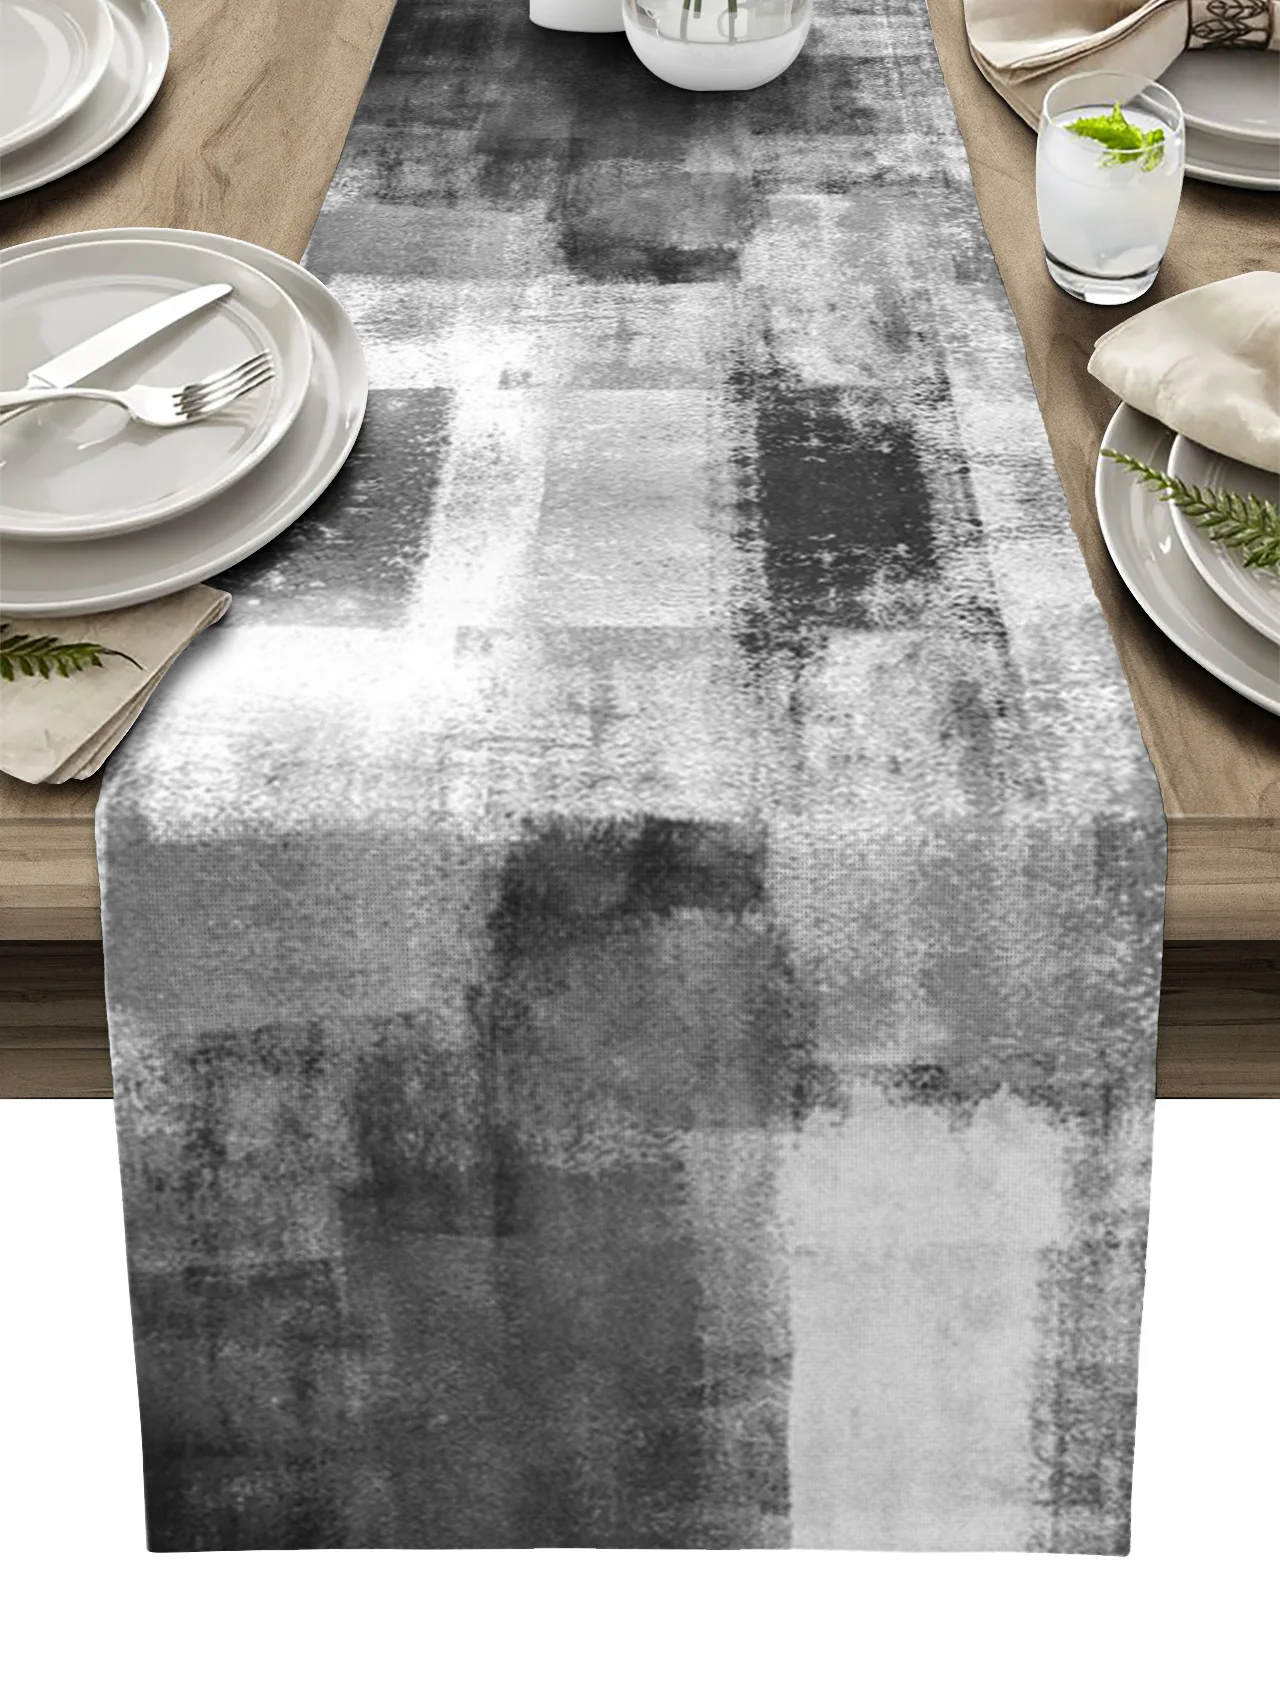 

Oil Painting Abstract Geometry Black White Grey Linen Table Runner Kitchen Table Decoration Tablecloth Wedding Party Decor